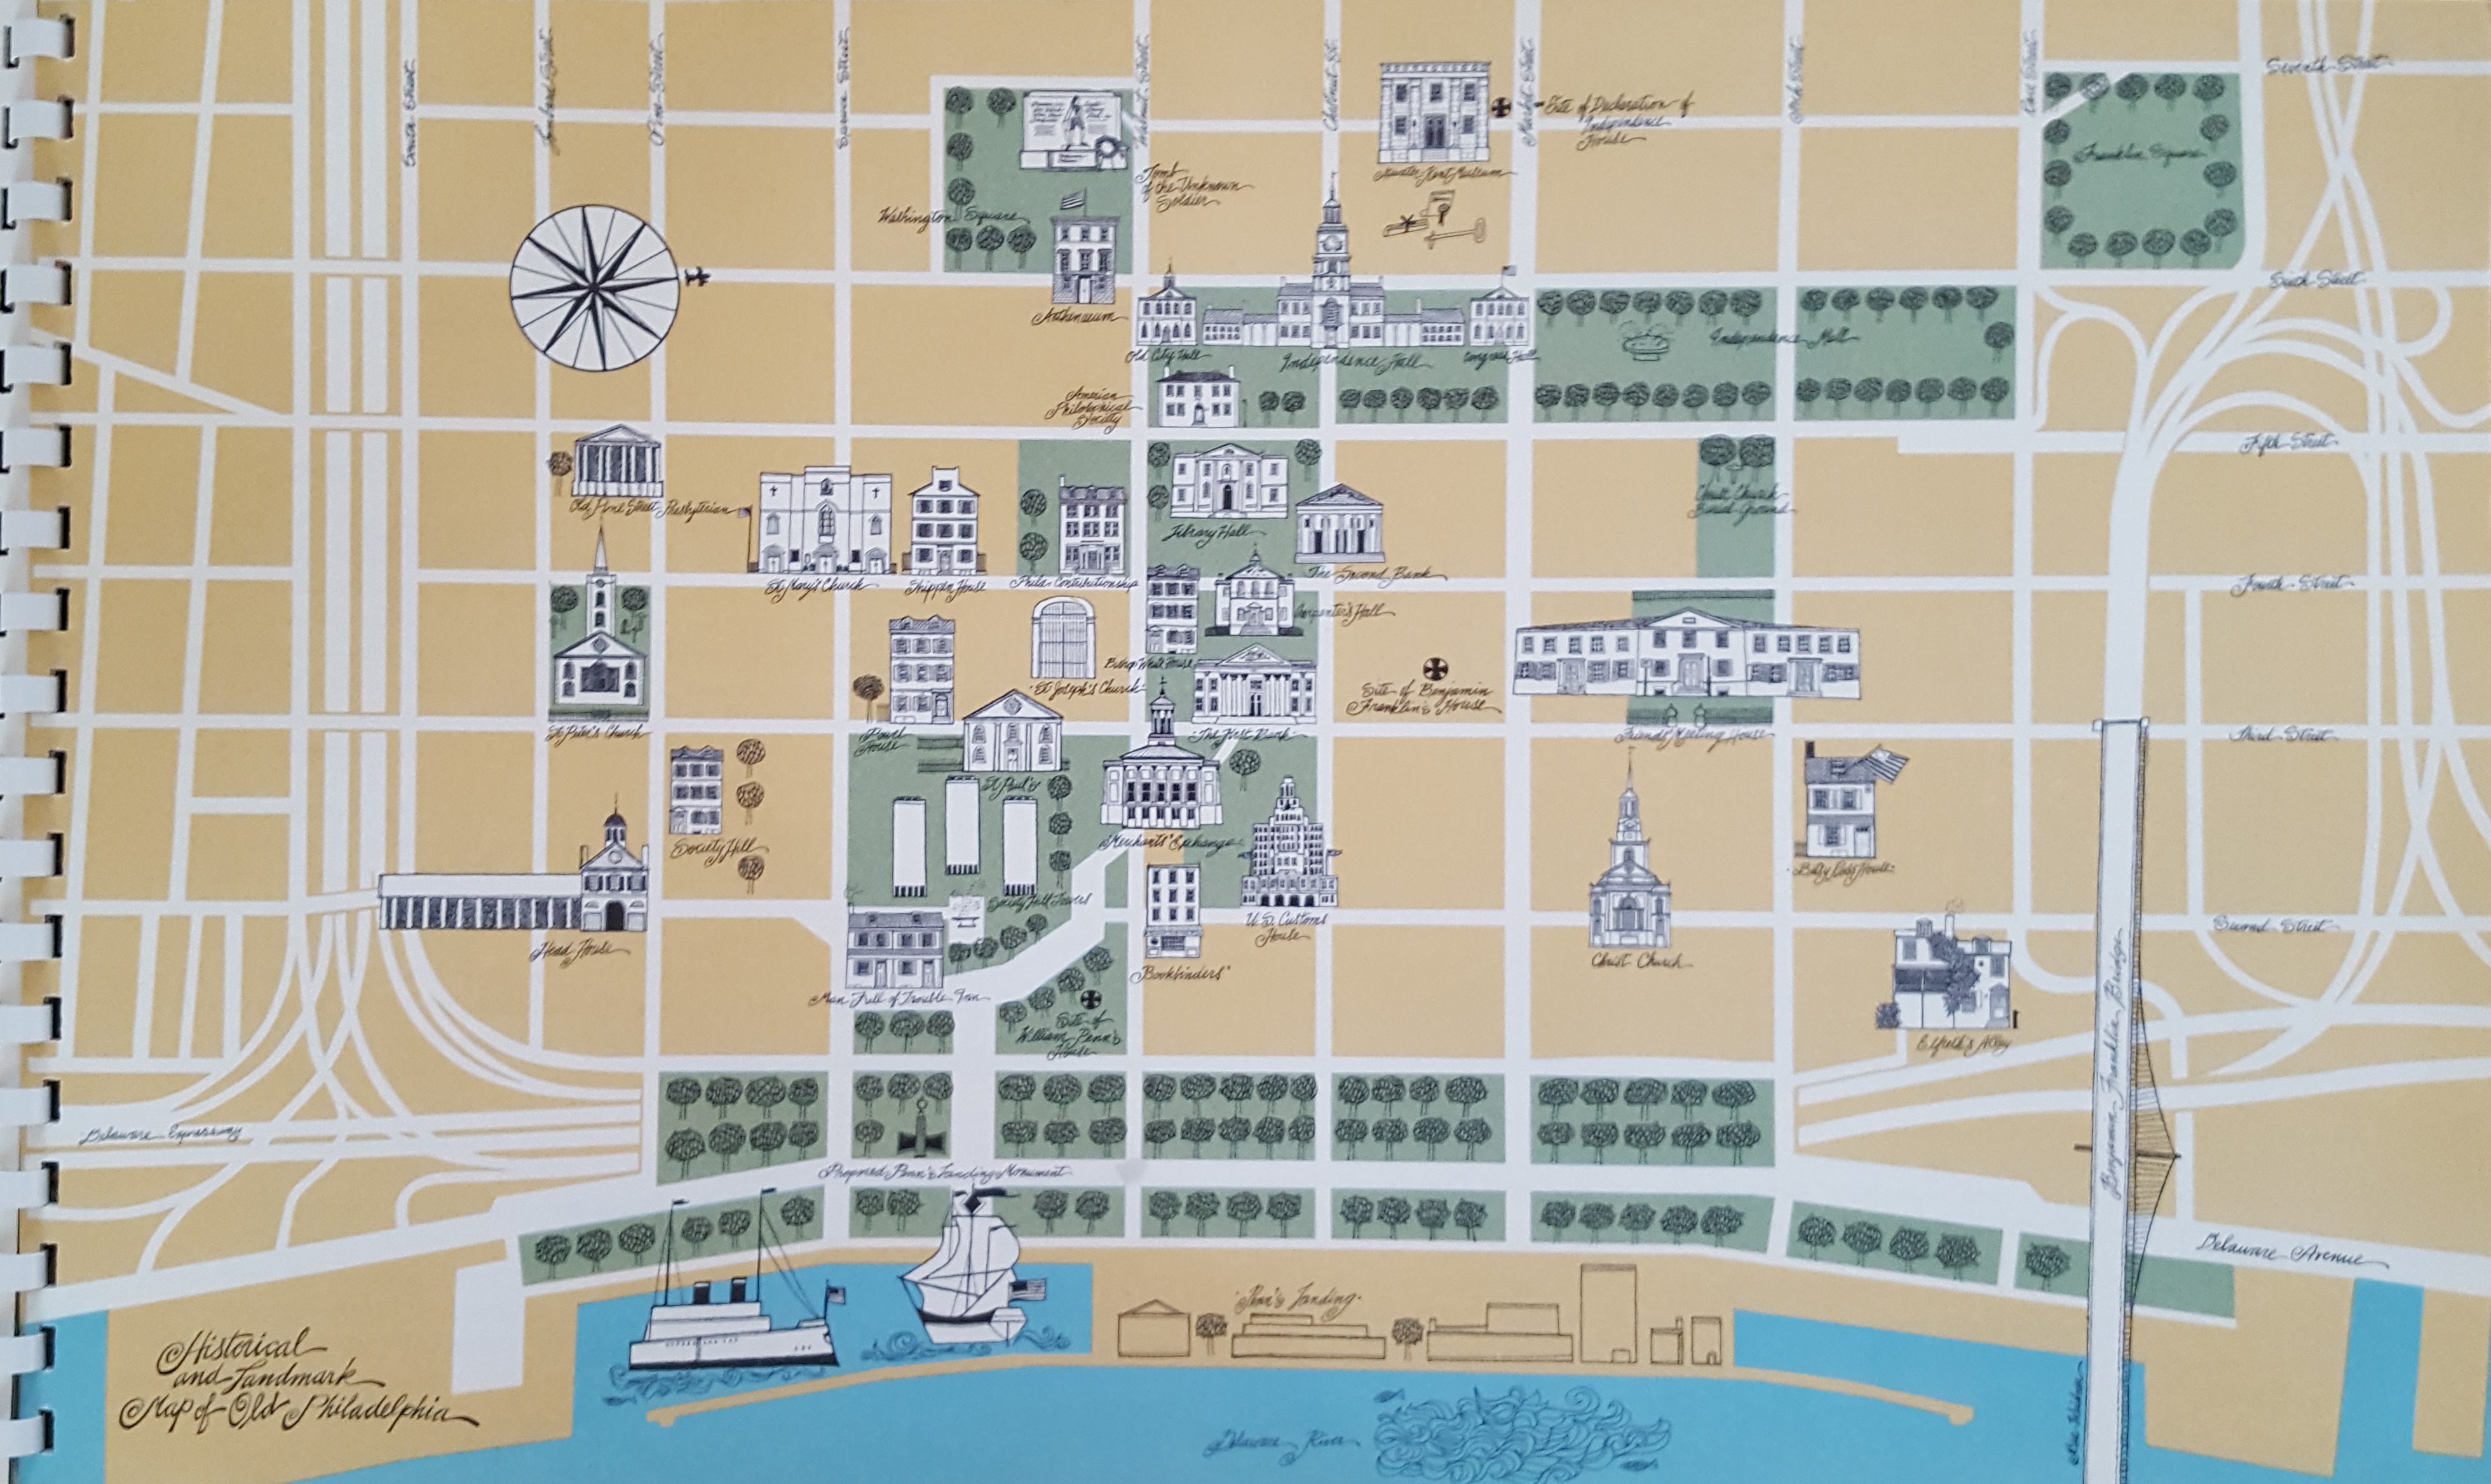 Artist’s rendering showing cover making connection between the waterfront and the historic district